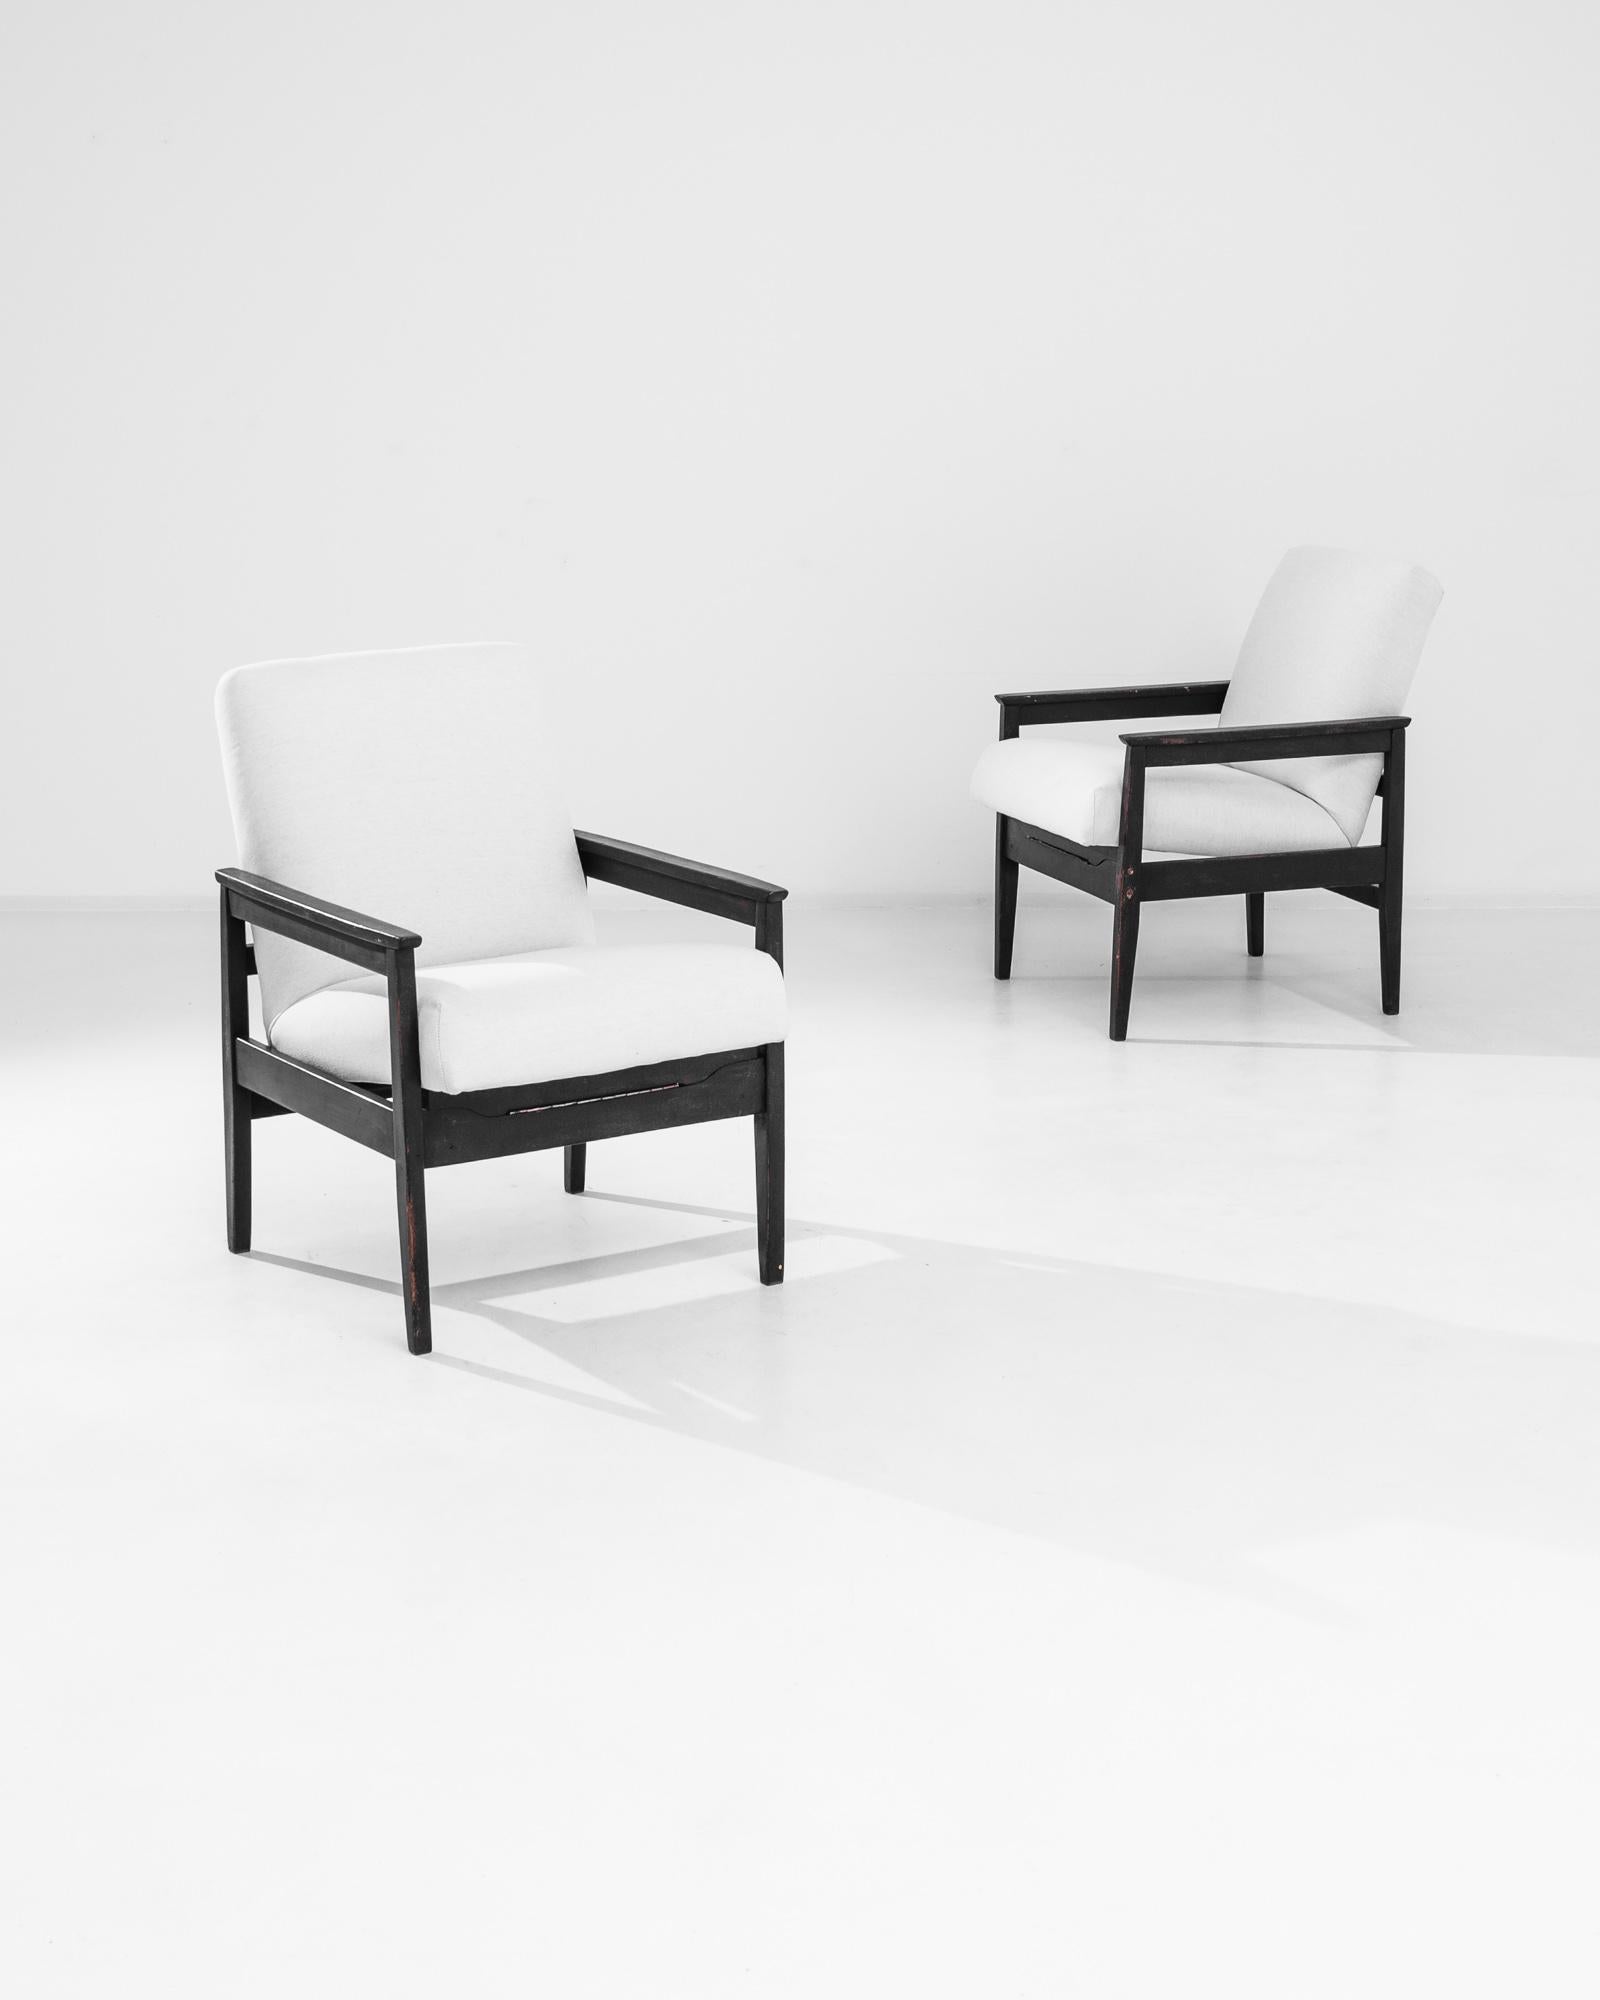 Graphic and sophisticated, this pair of vintage armchairs possess a unique Modernist silhouette. Made in the former Czechoslovakia in the 1960s, a floating seat hangs at a reclined angle between the clean lines of the rectilinear frame. The cushions